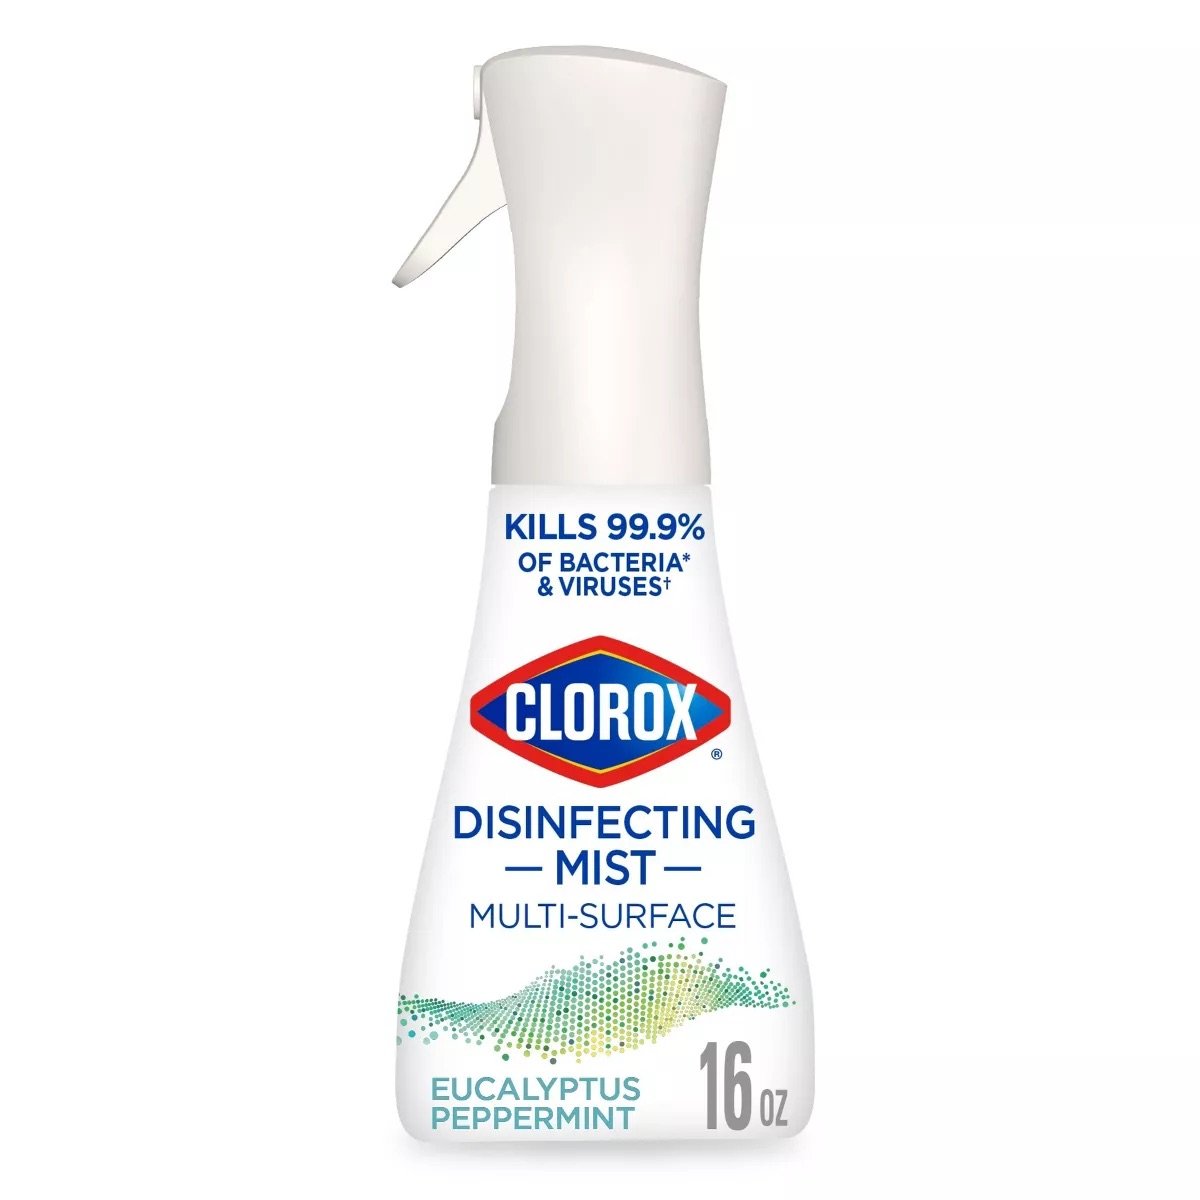 Disinfectant - Clorox Eucalyptus Peppermint Ready-to-Use Disinfecting Mist.jpeg